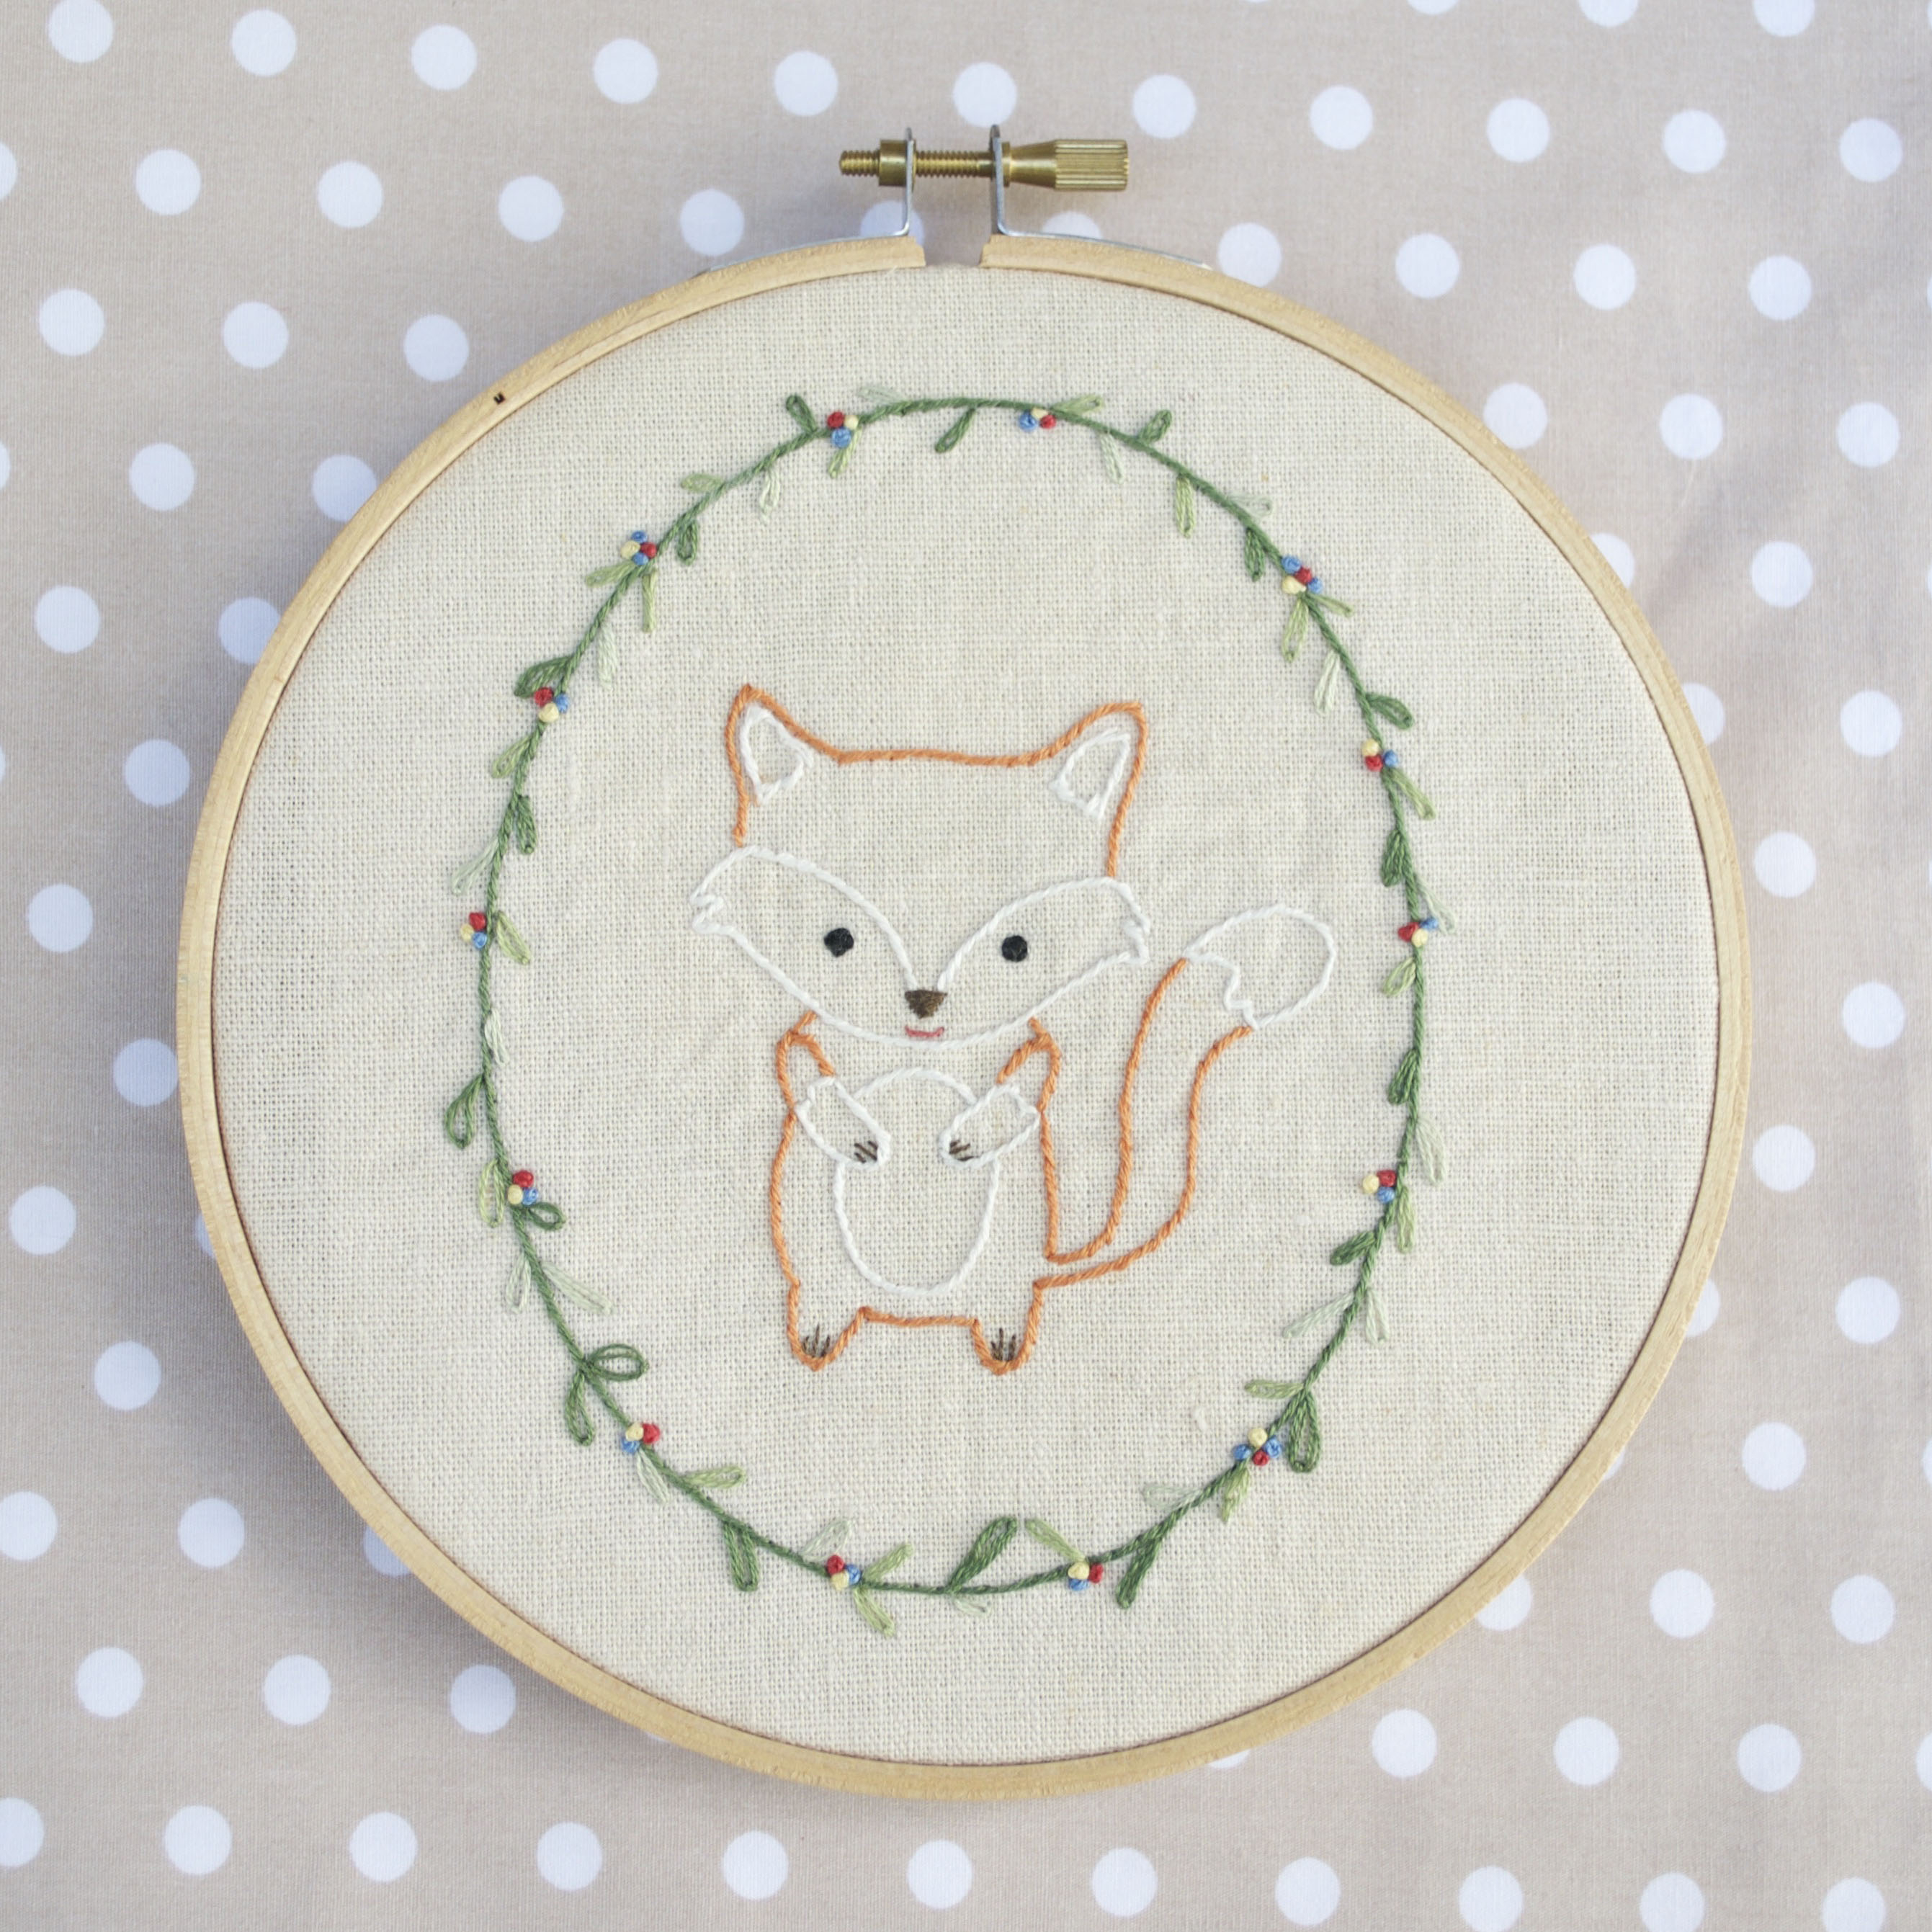 Fox Embroidery Pattern Little Fox Hand Embroidery Pdf Pattern Instructions